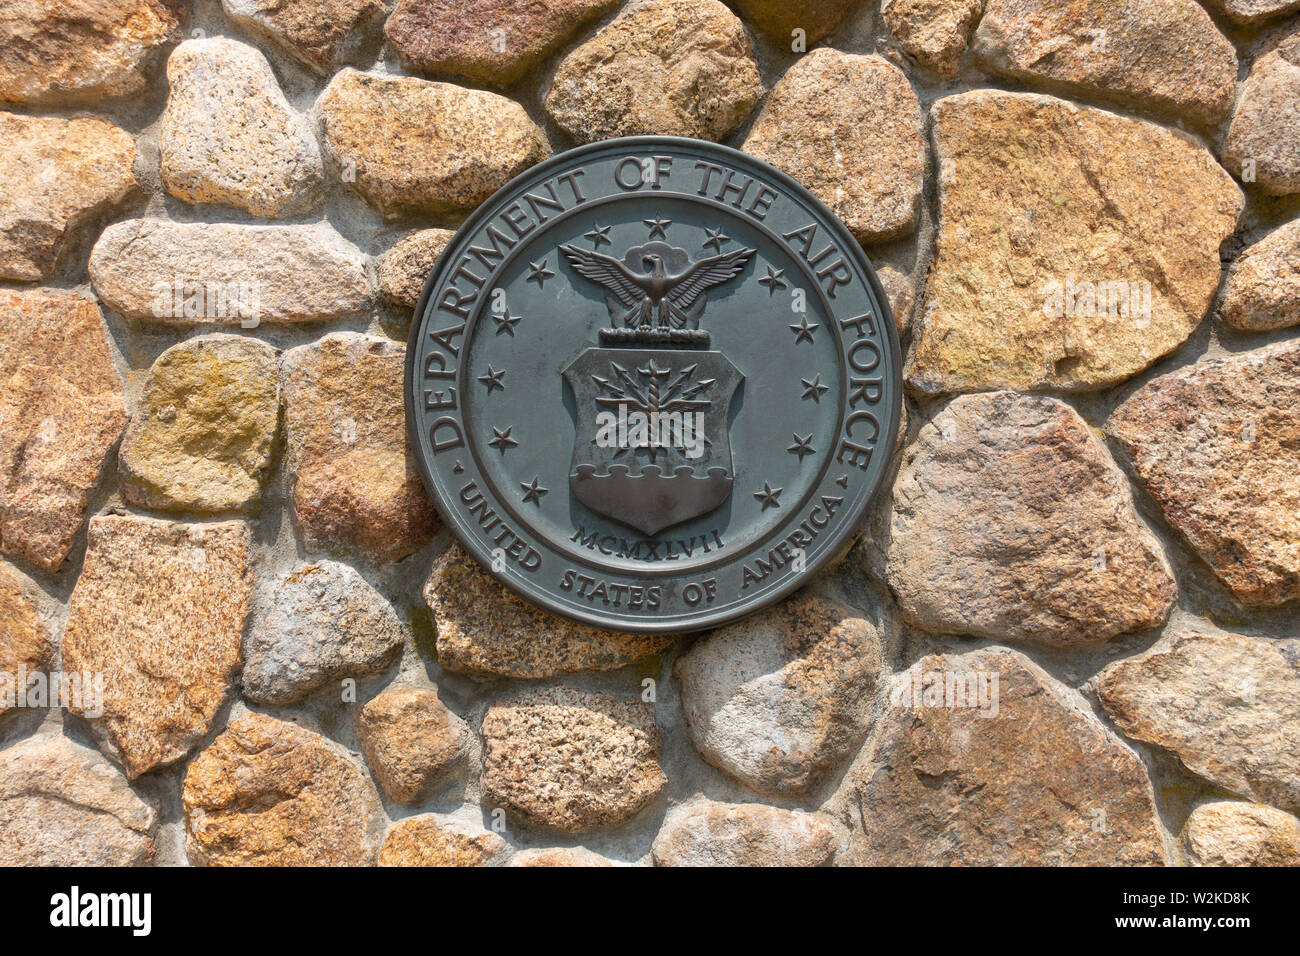 United States Department of the Air Force brass emblem plaque on stone wall at National Cemetery in Bourne, Cape Cod Massachusetts Stock Photo